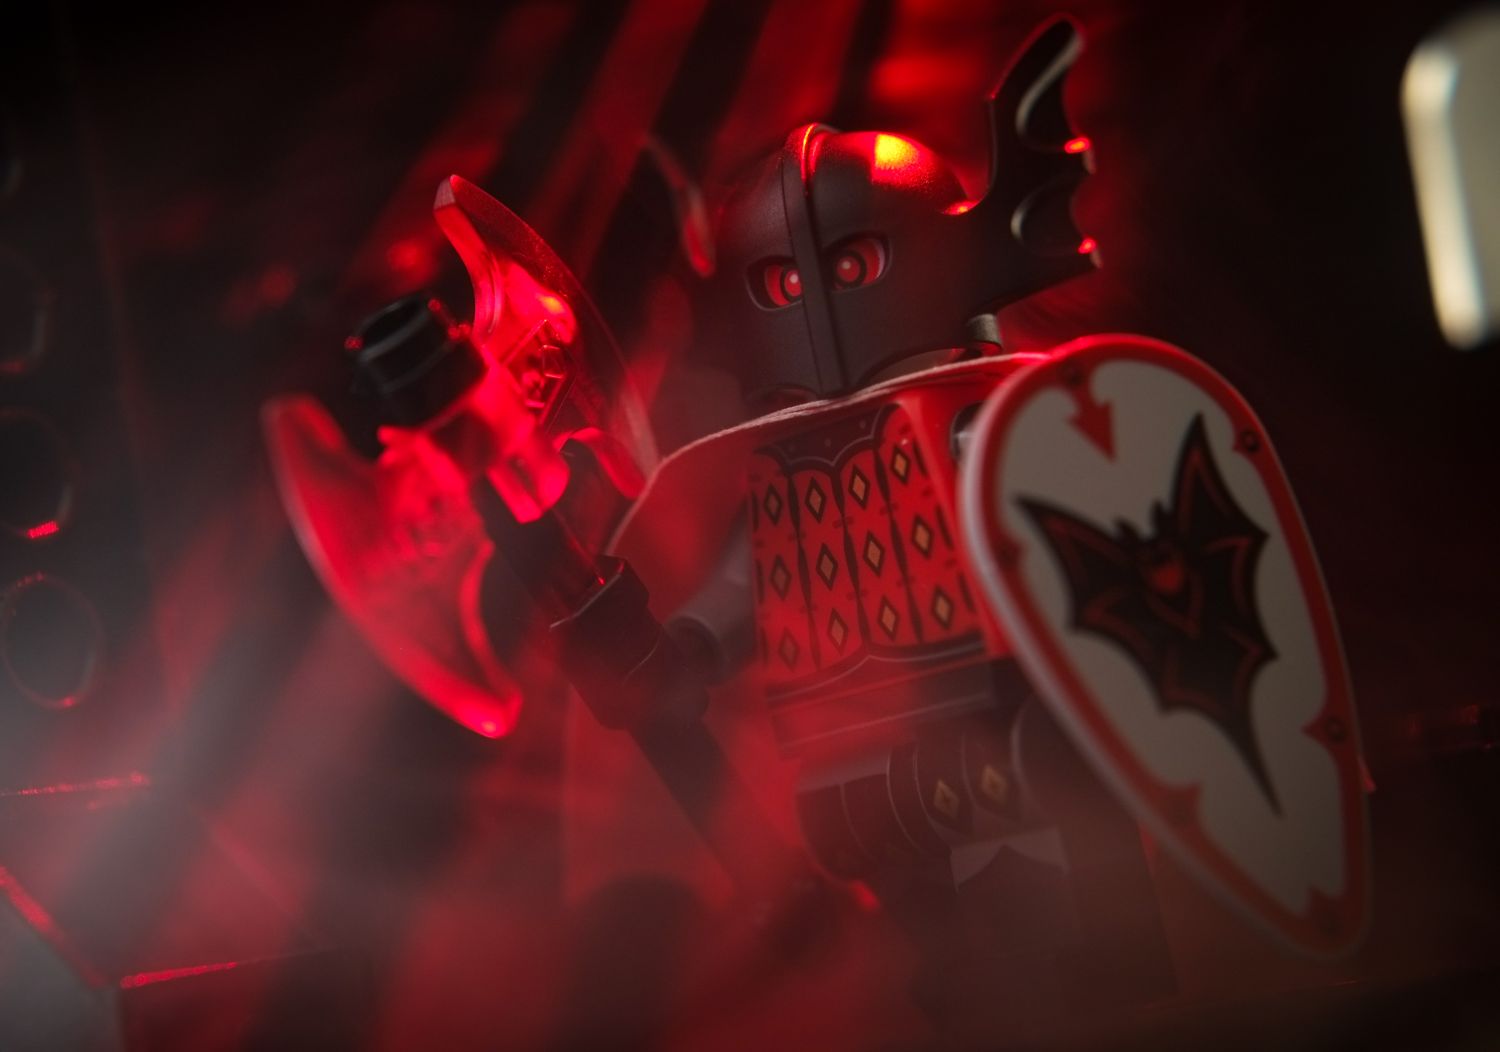 A LEGO Bat Lord minifigure in helmet, holding a trans red axe and a shield.